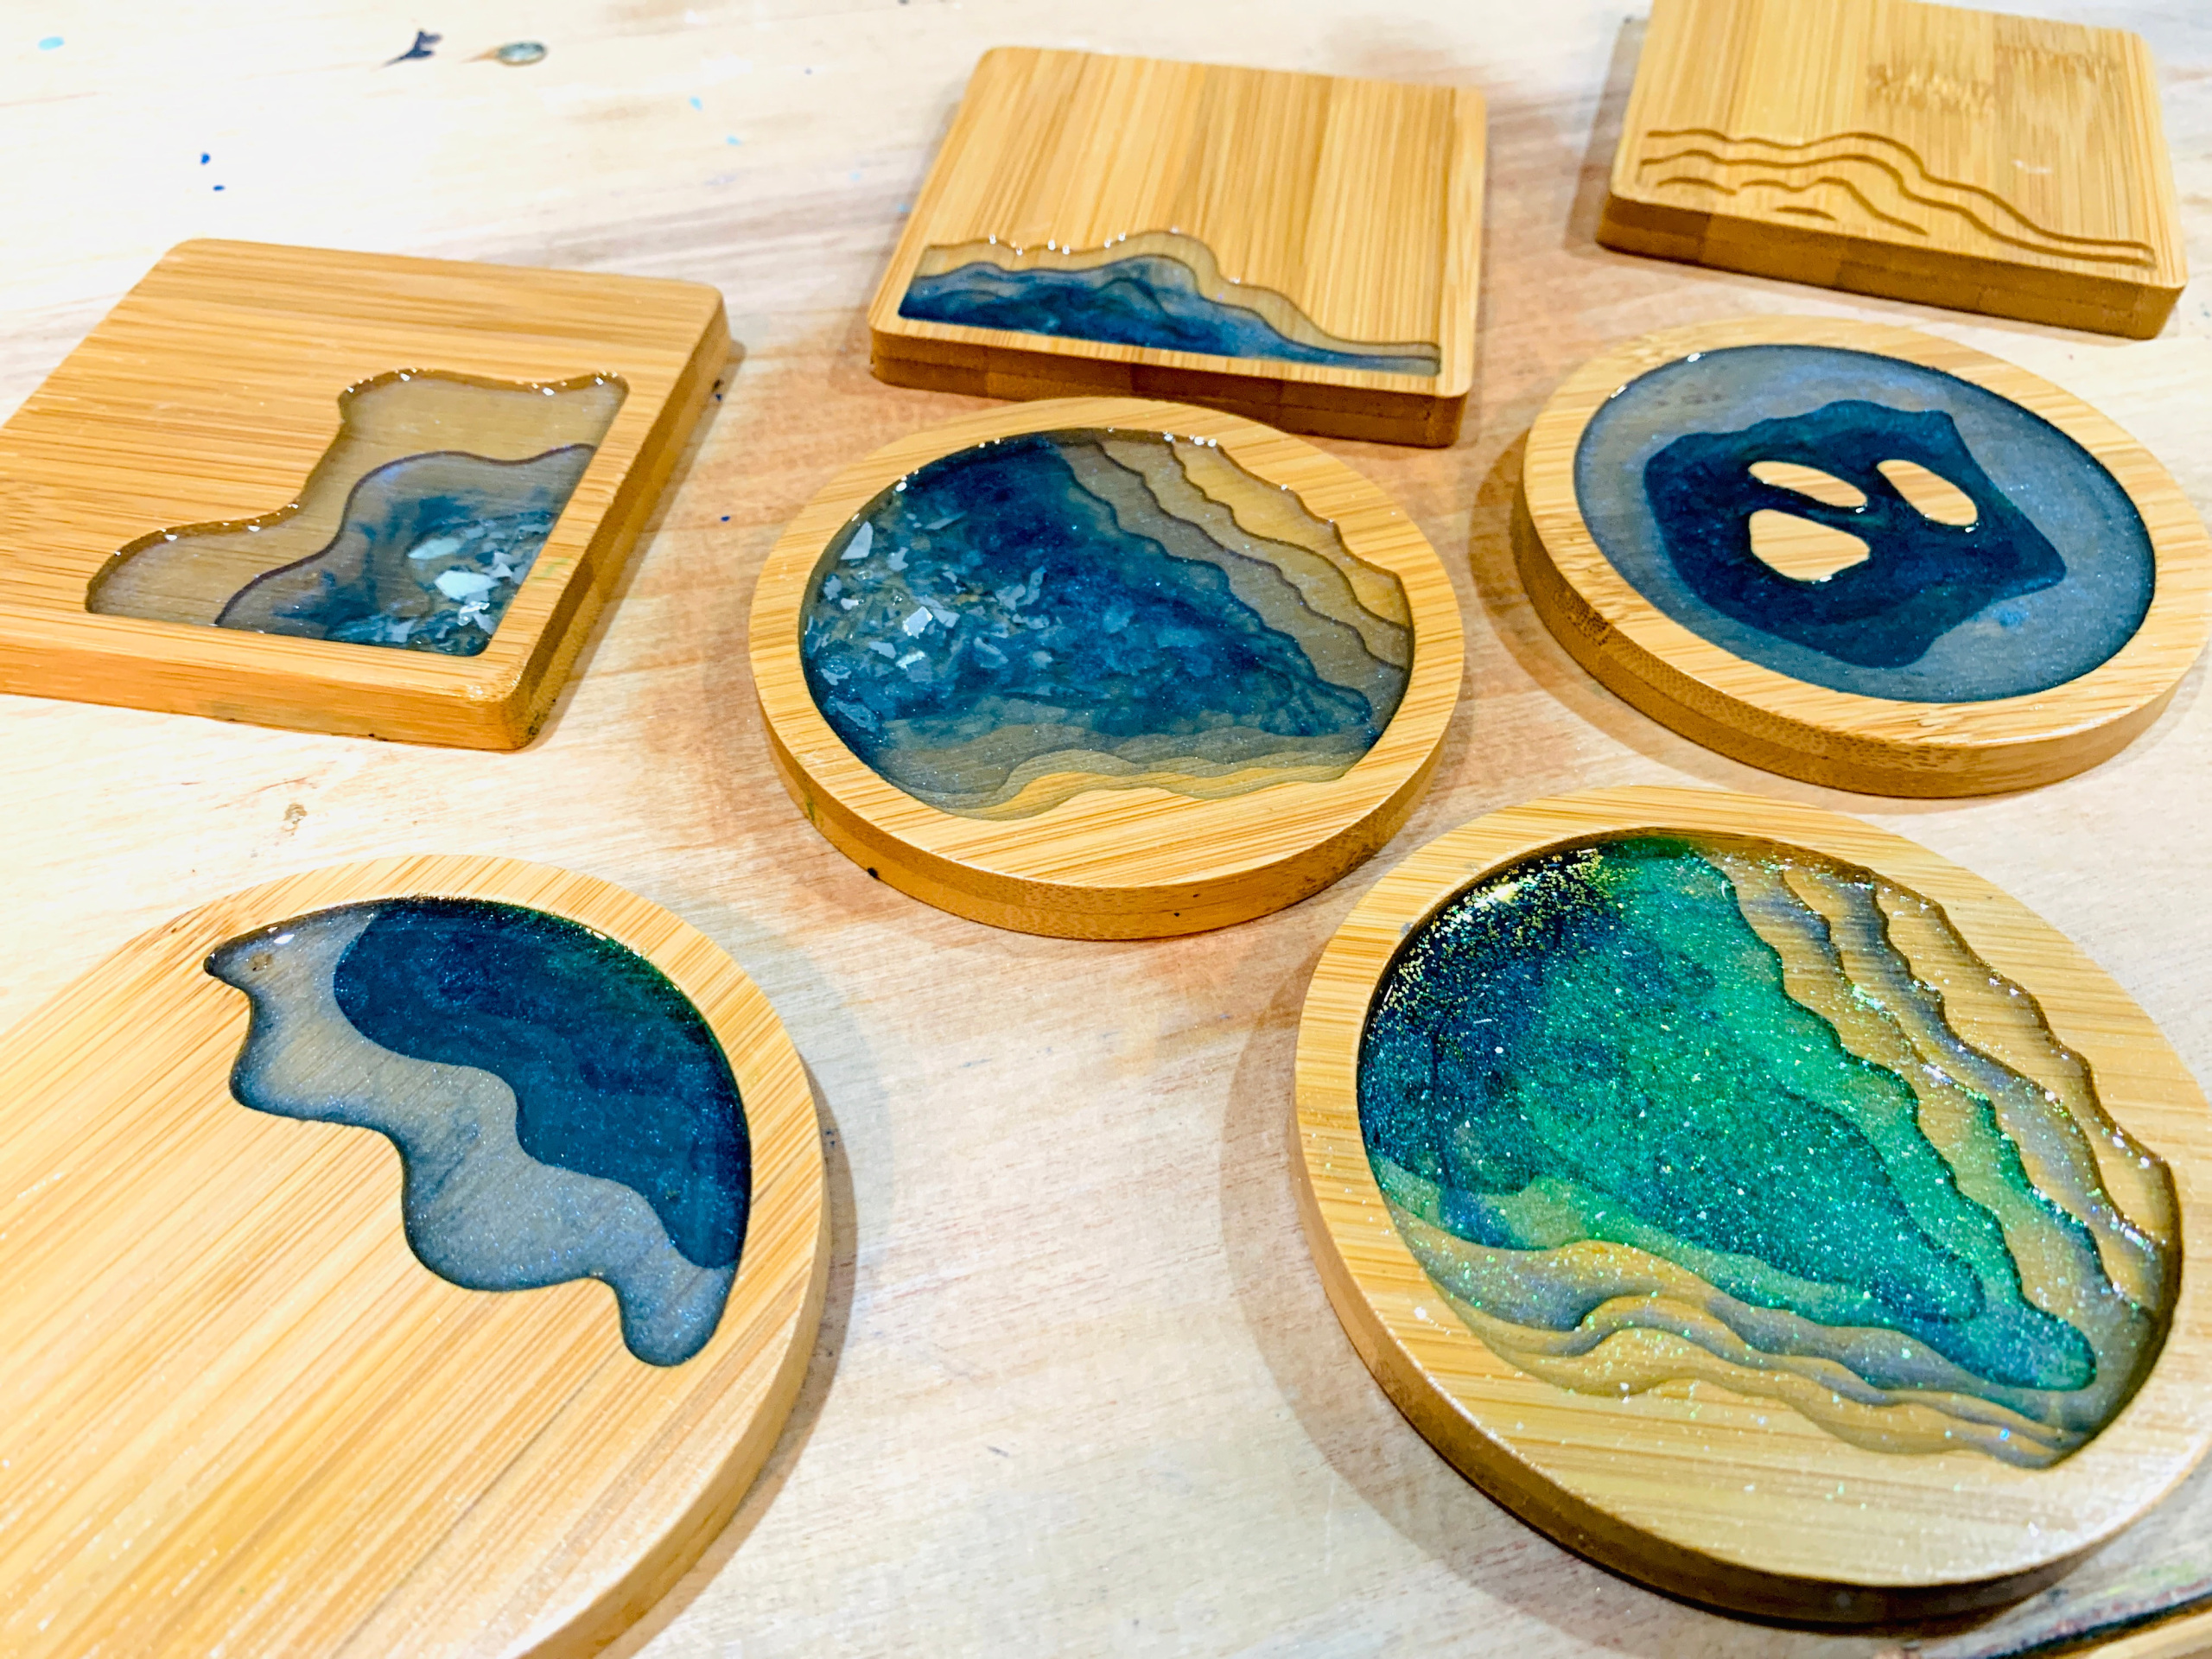 How to Make a Wood and Resin Pouring Mold That is Modular and Reusable, DIY Project